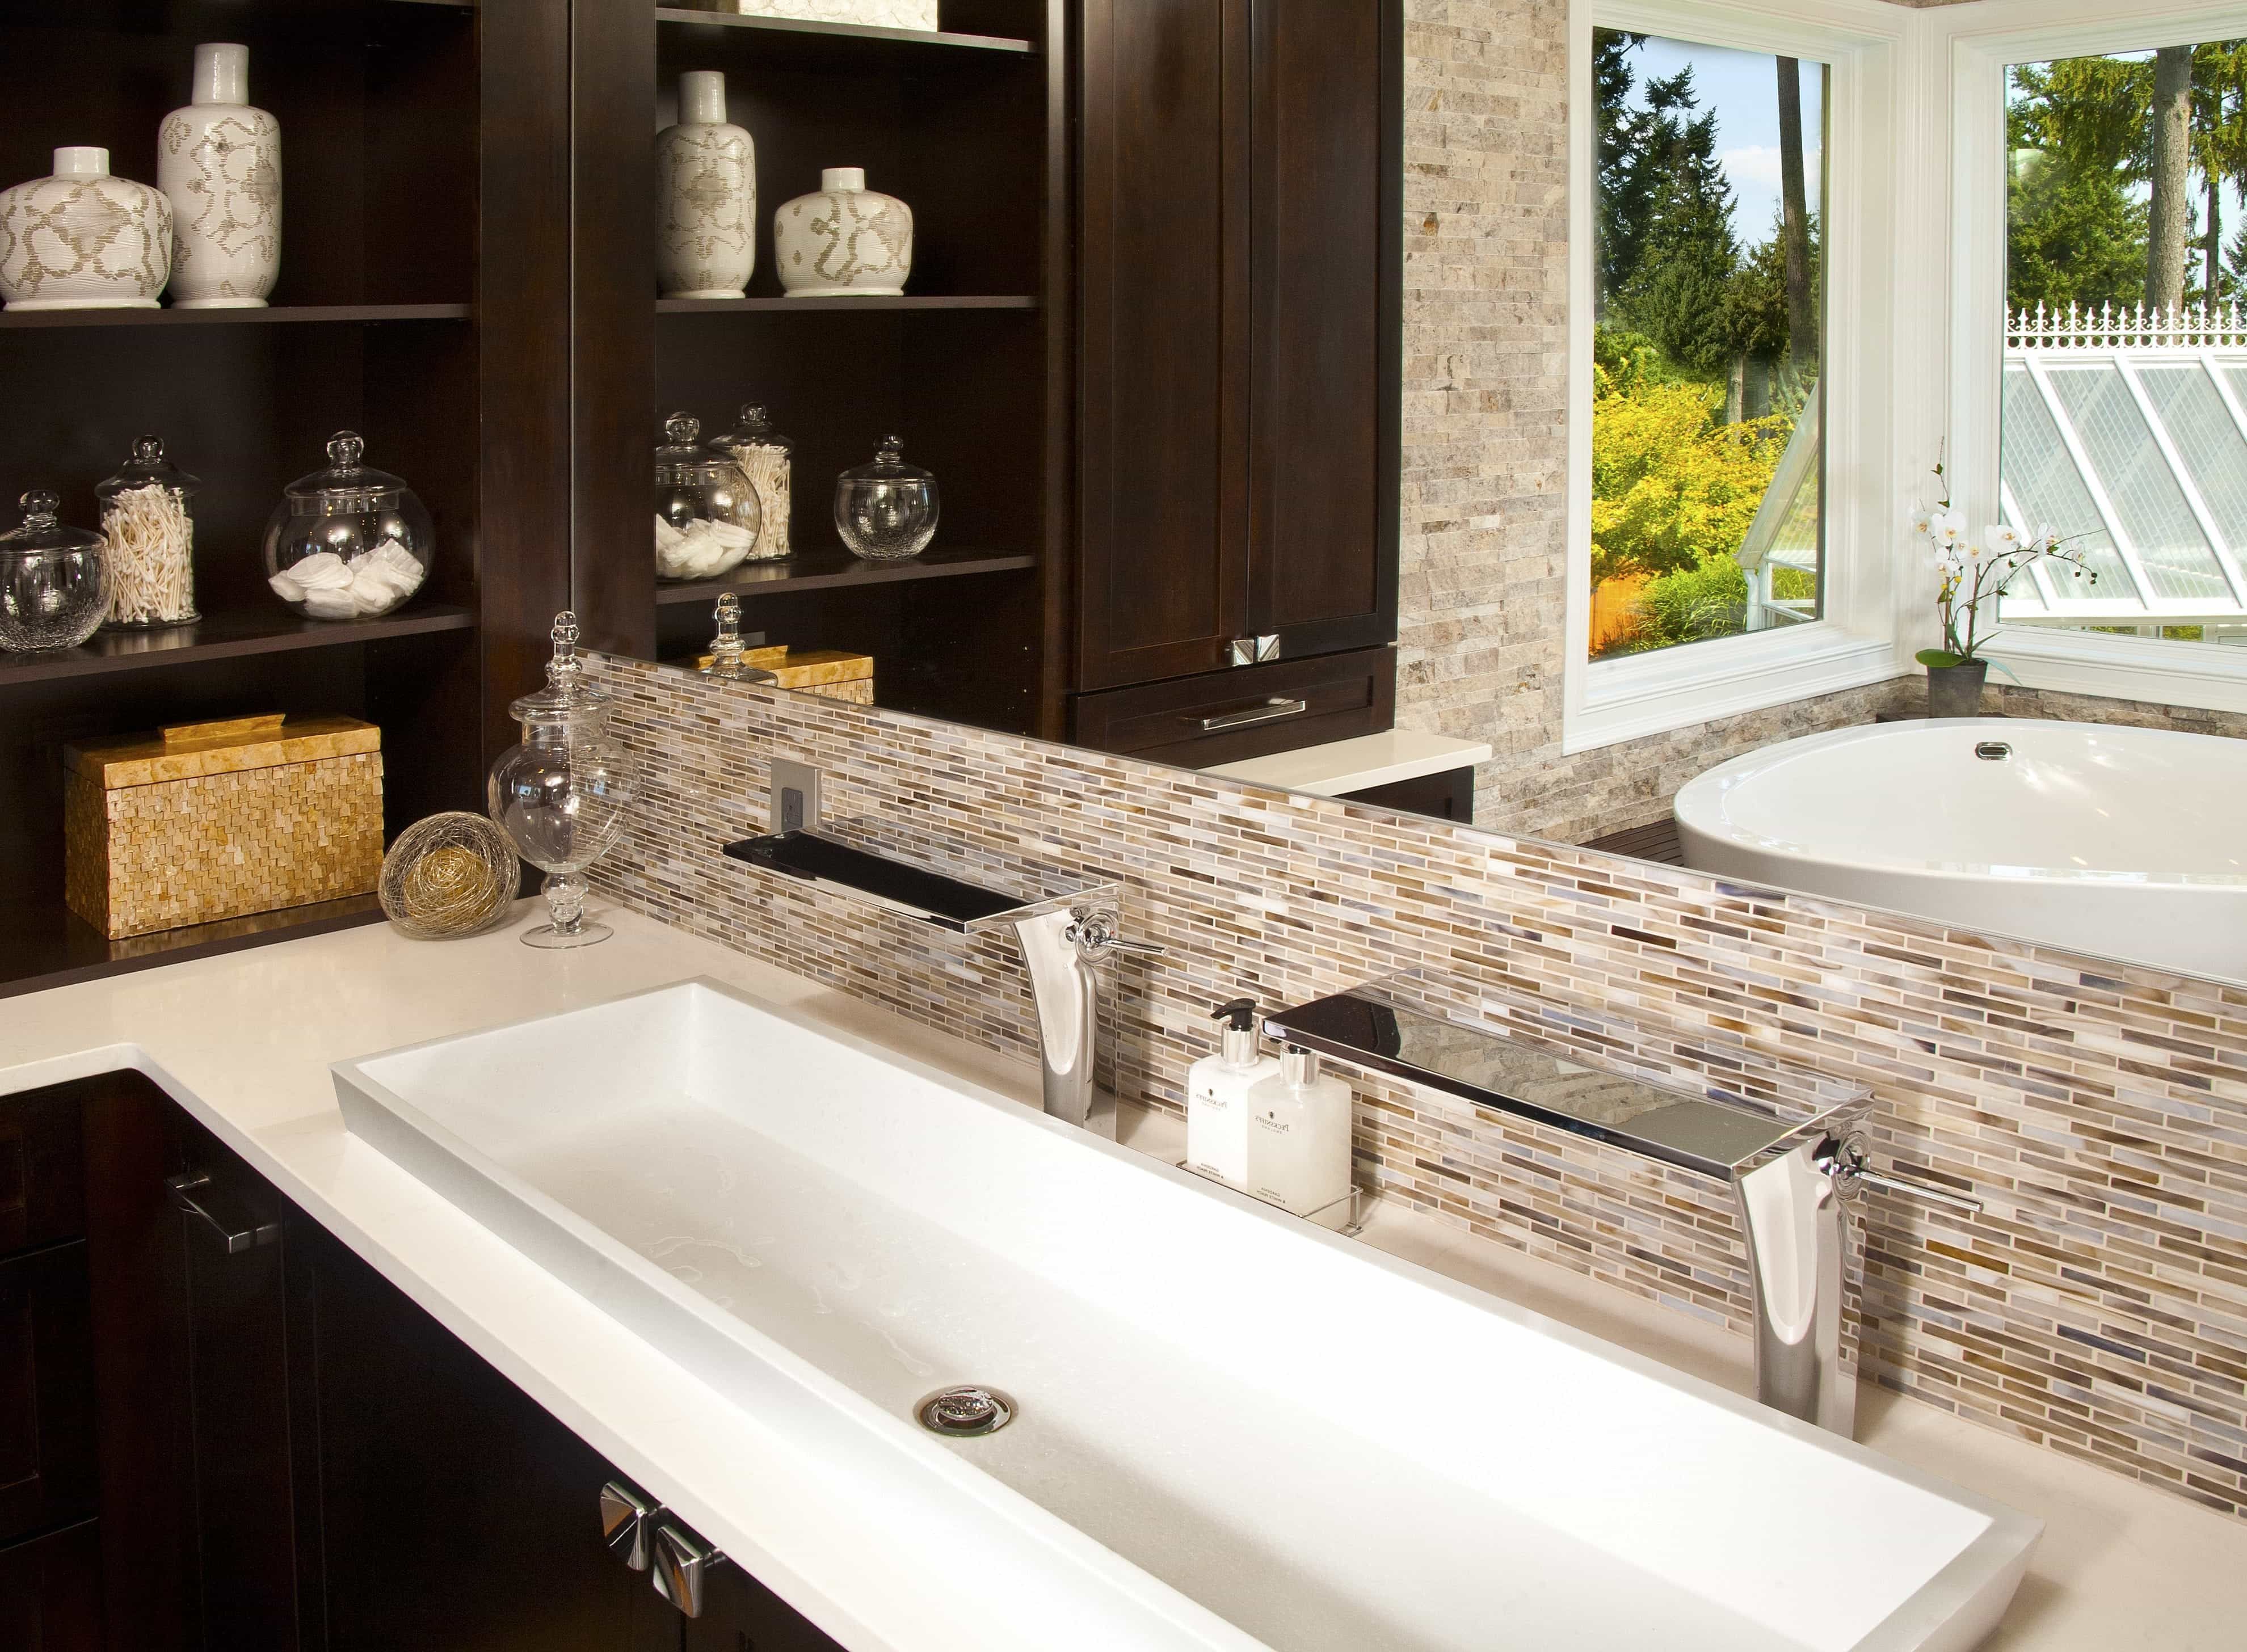 Contemporary Corner Bathroom Vanity With Rectangular Sink And Chrome Faucets (View 16 of 24)